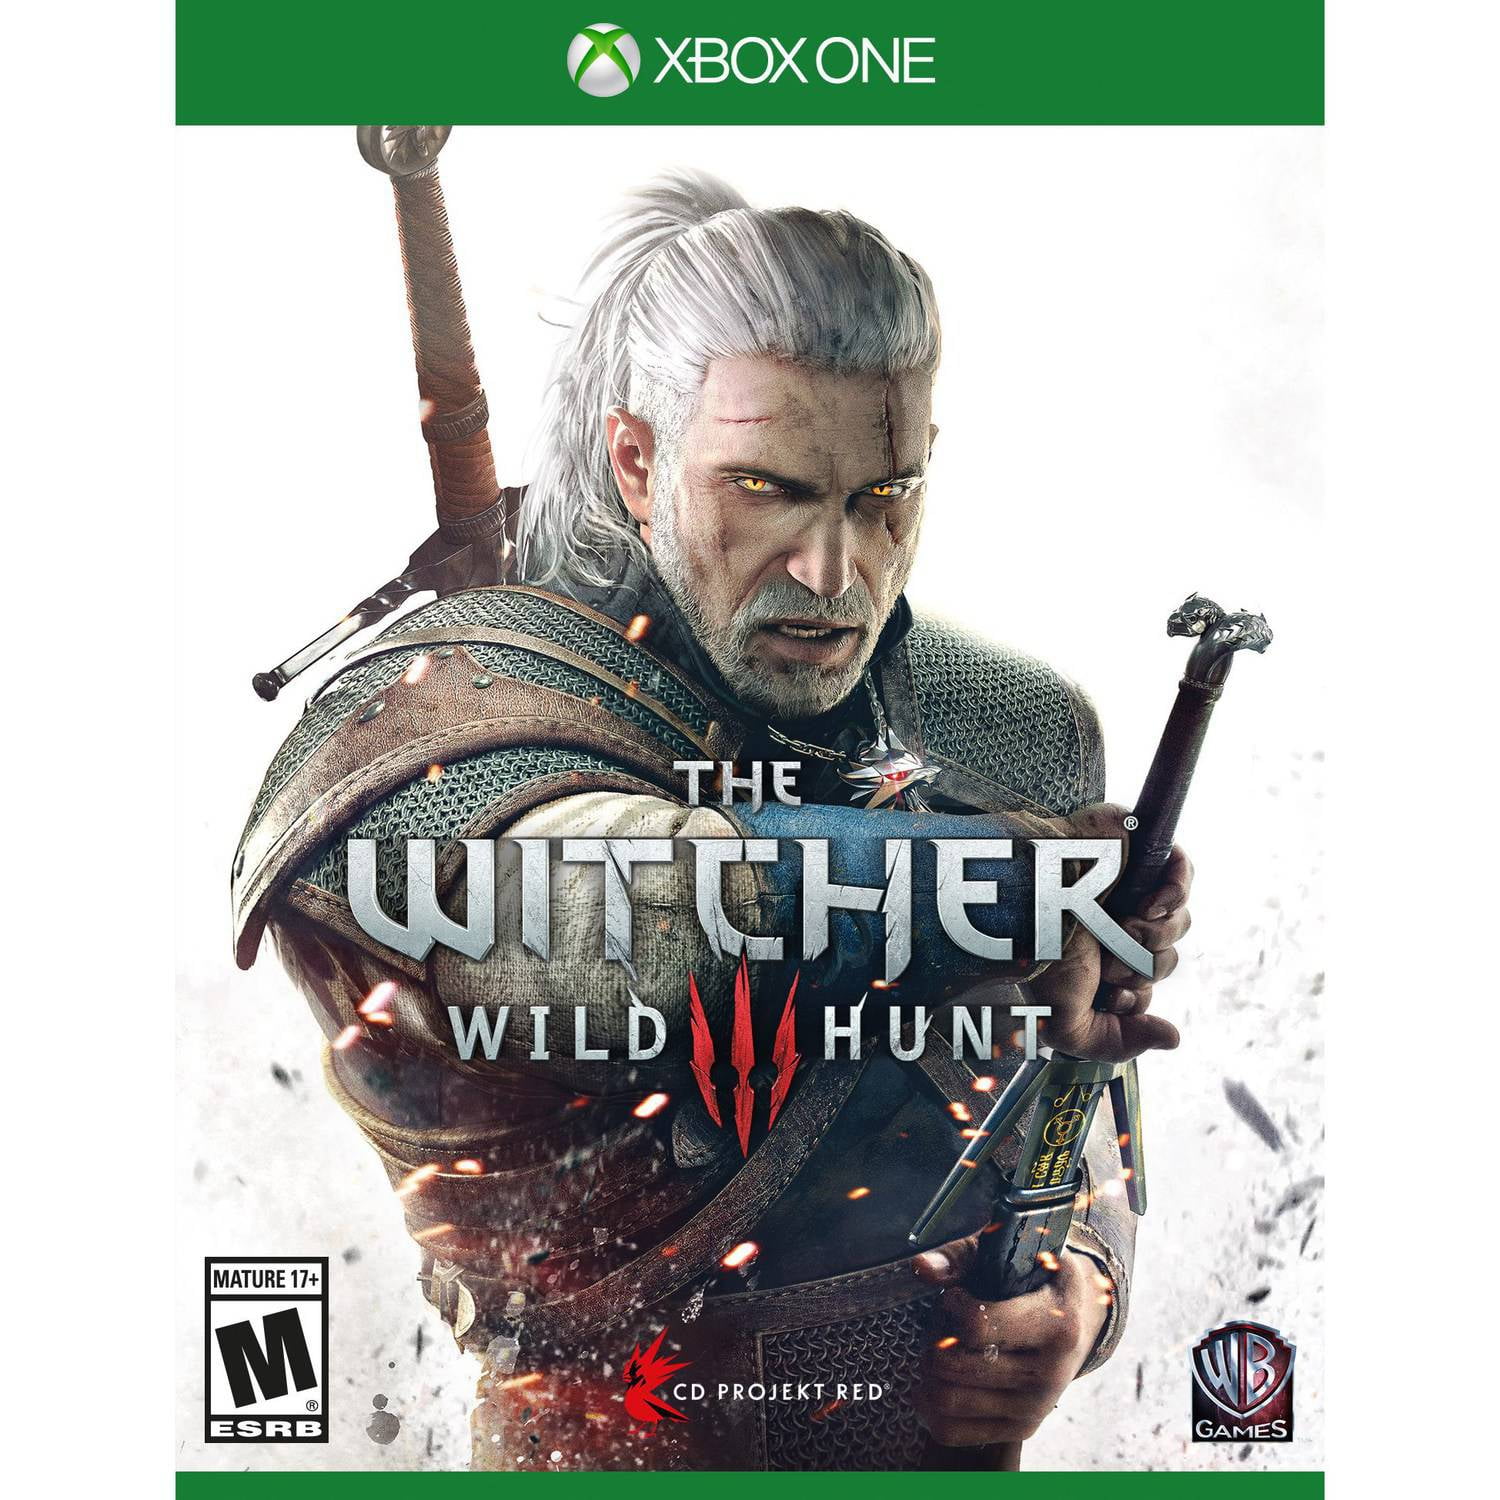 Warner Bros. Interactive publishing The Witcher 2 360 in